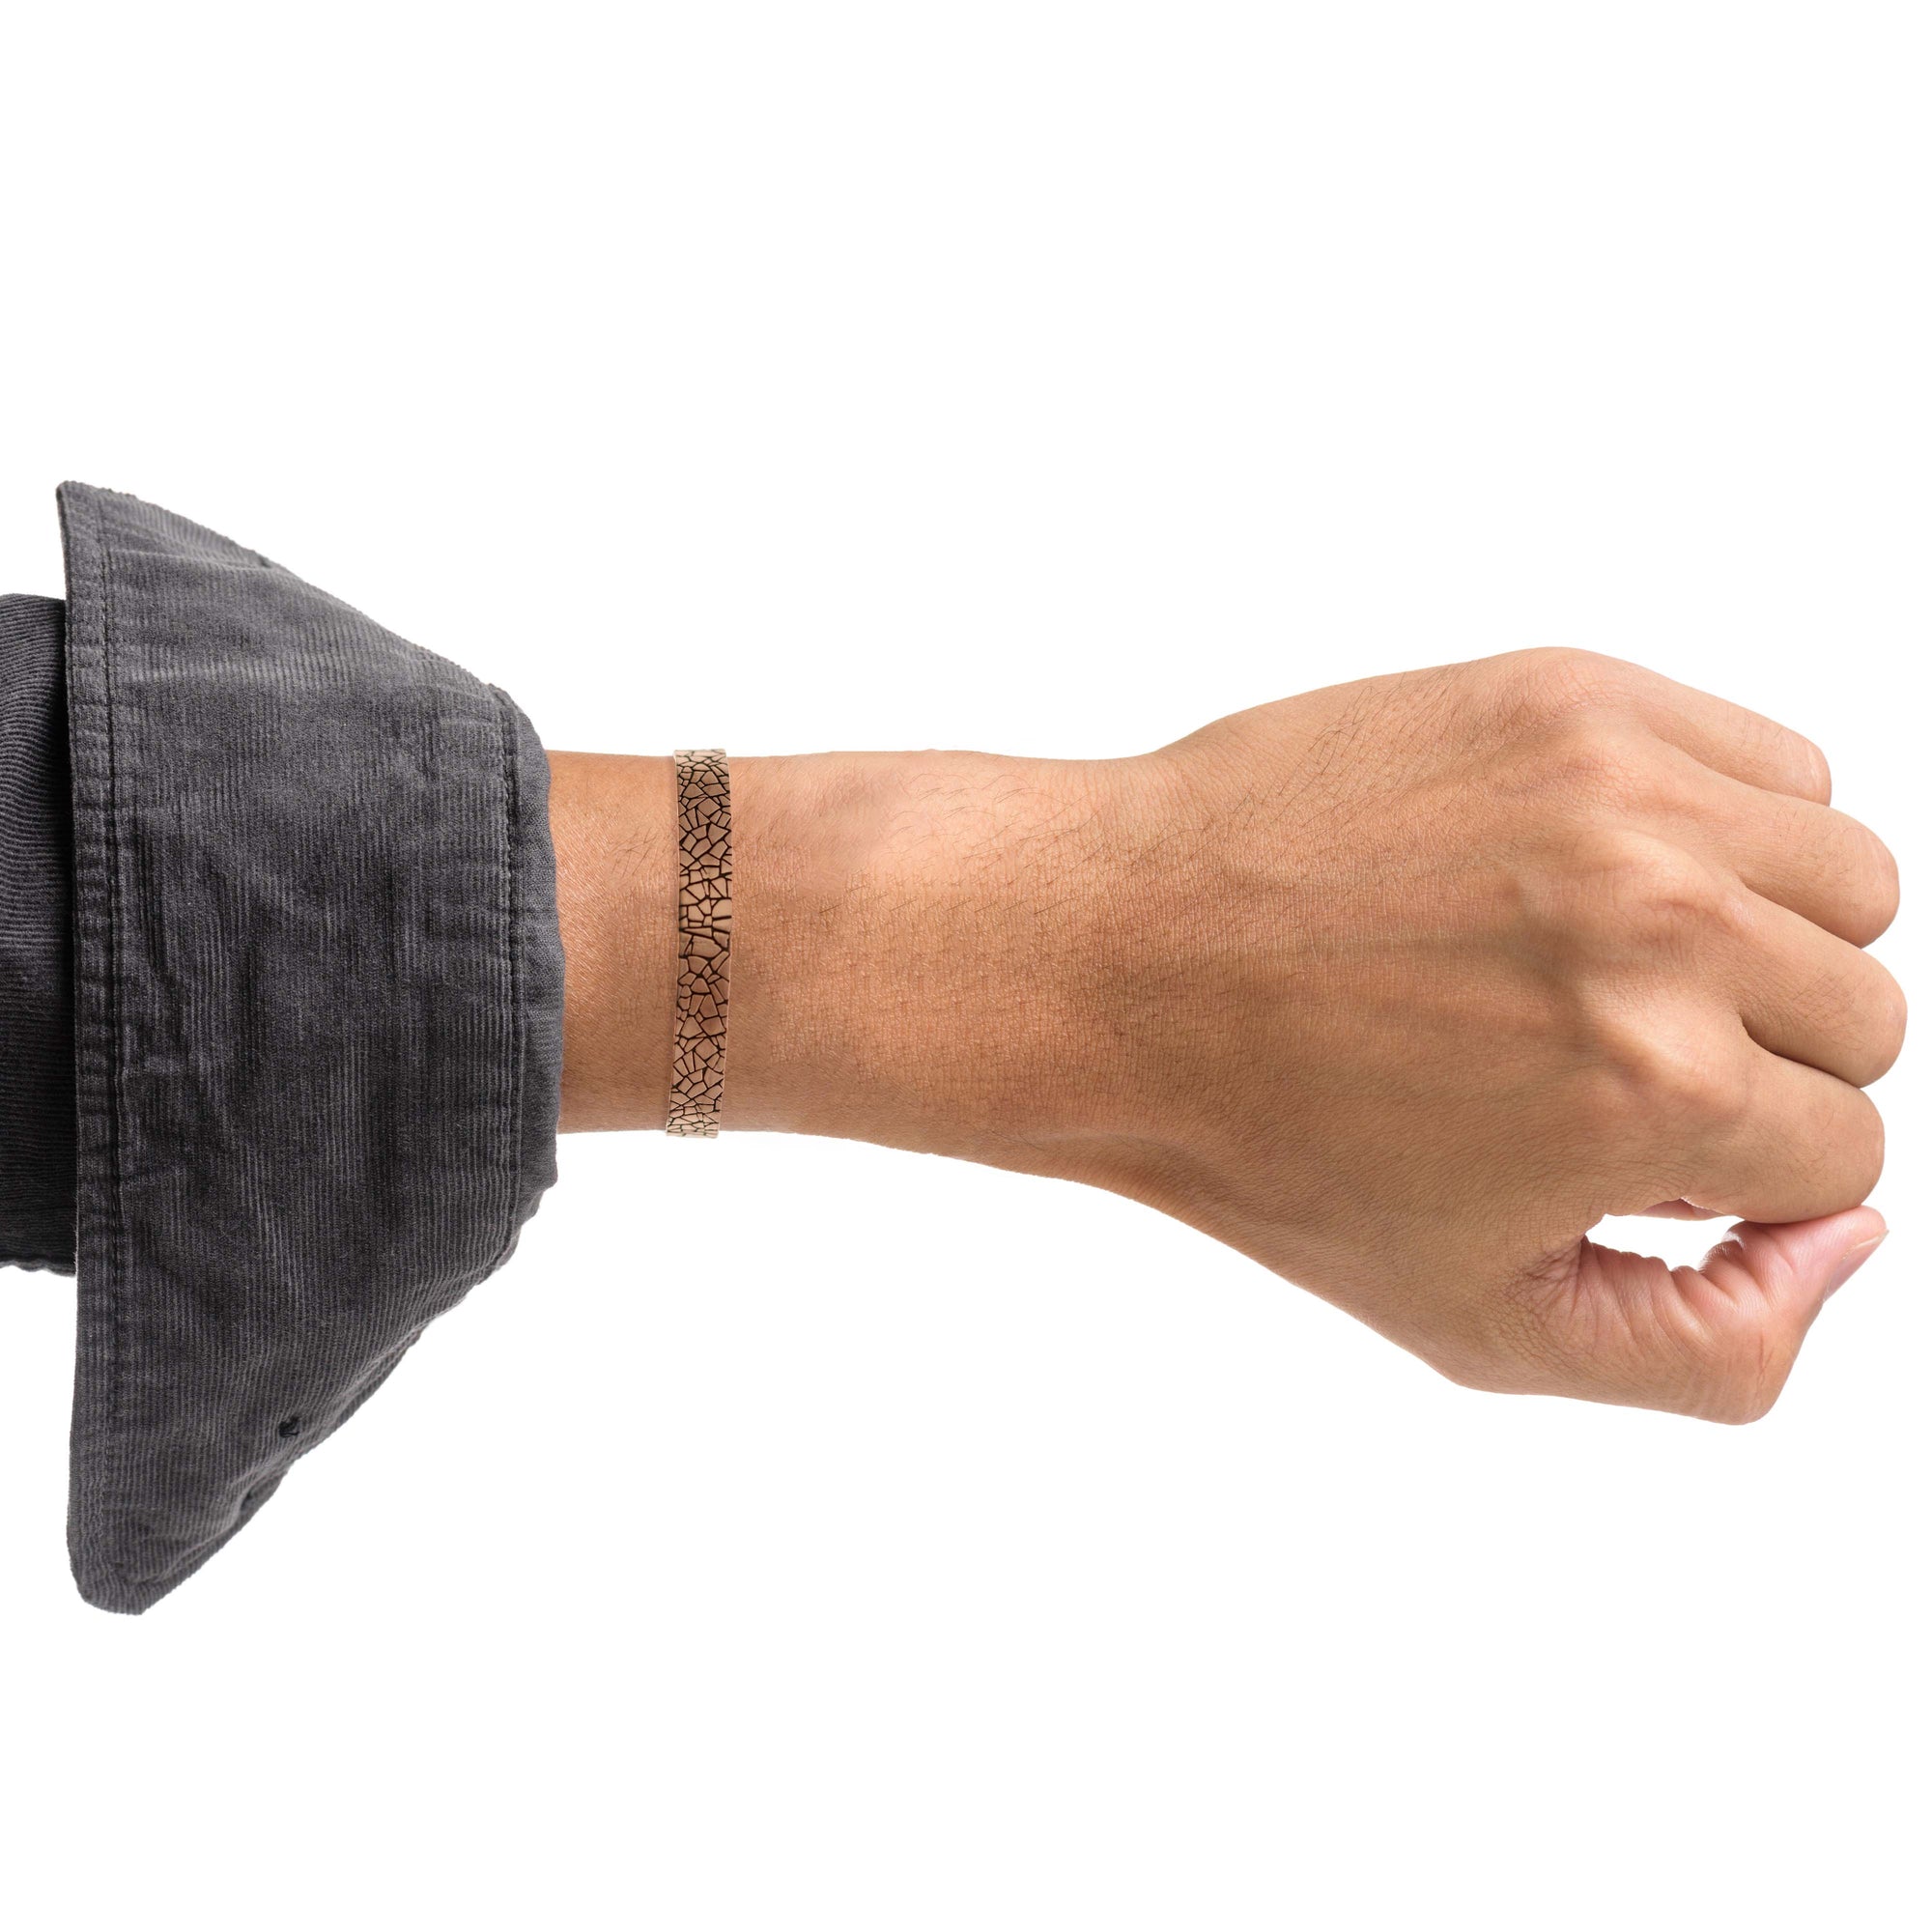 10mm Wide Men's Embossed Mosaic Solid Copper Cuff on Male Model's Wrist Wearing Gray Shirt